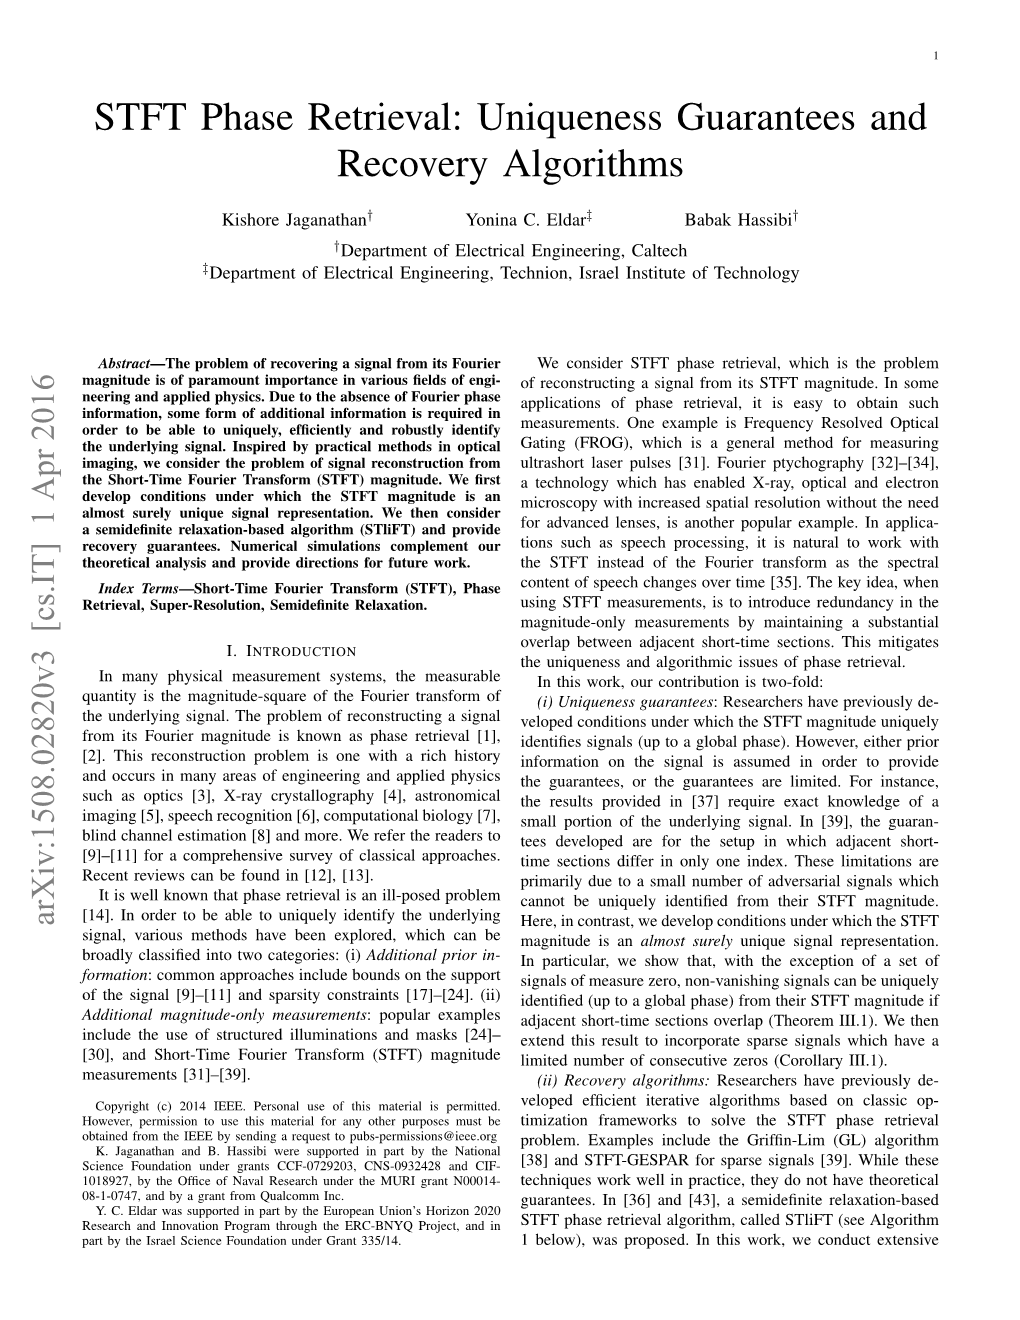 STFT Phase Retrieval: Uniqueness Guarantees and Recovery Algorithms